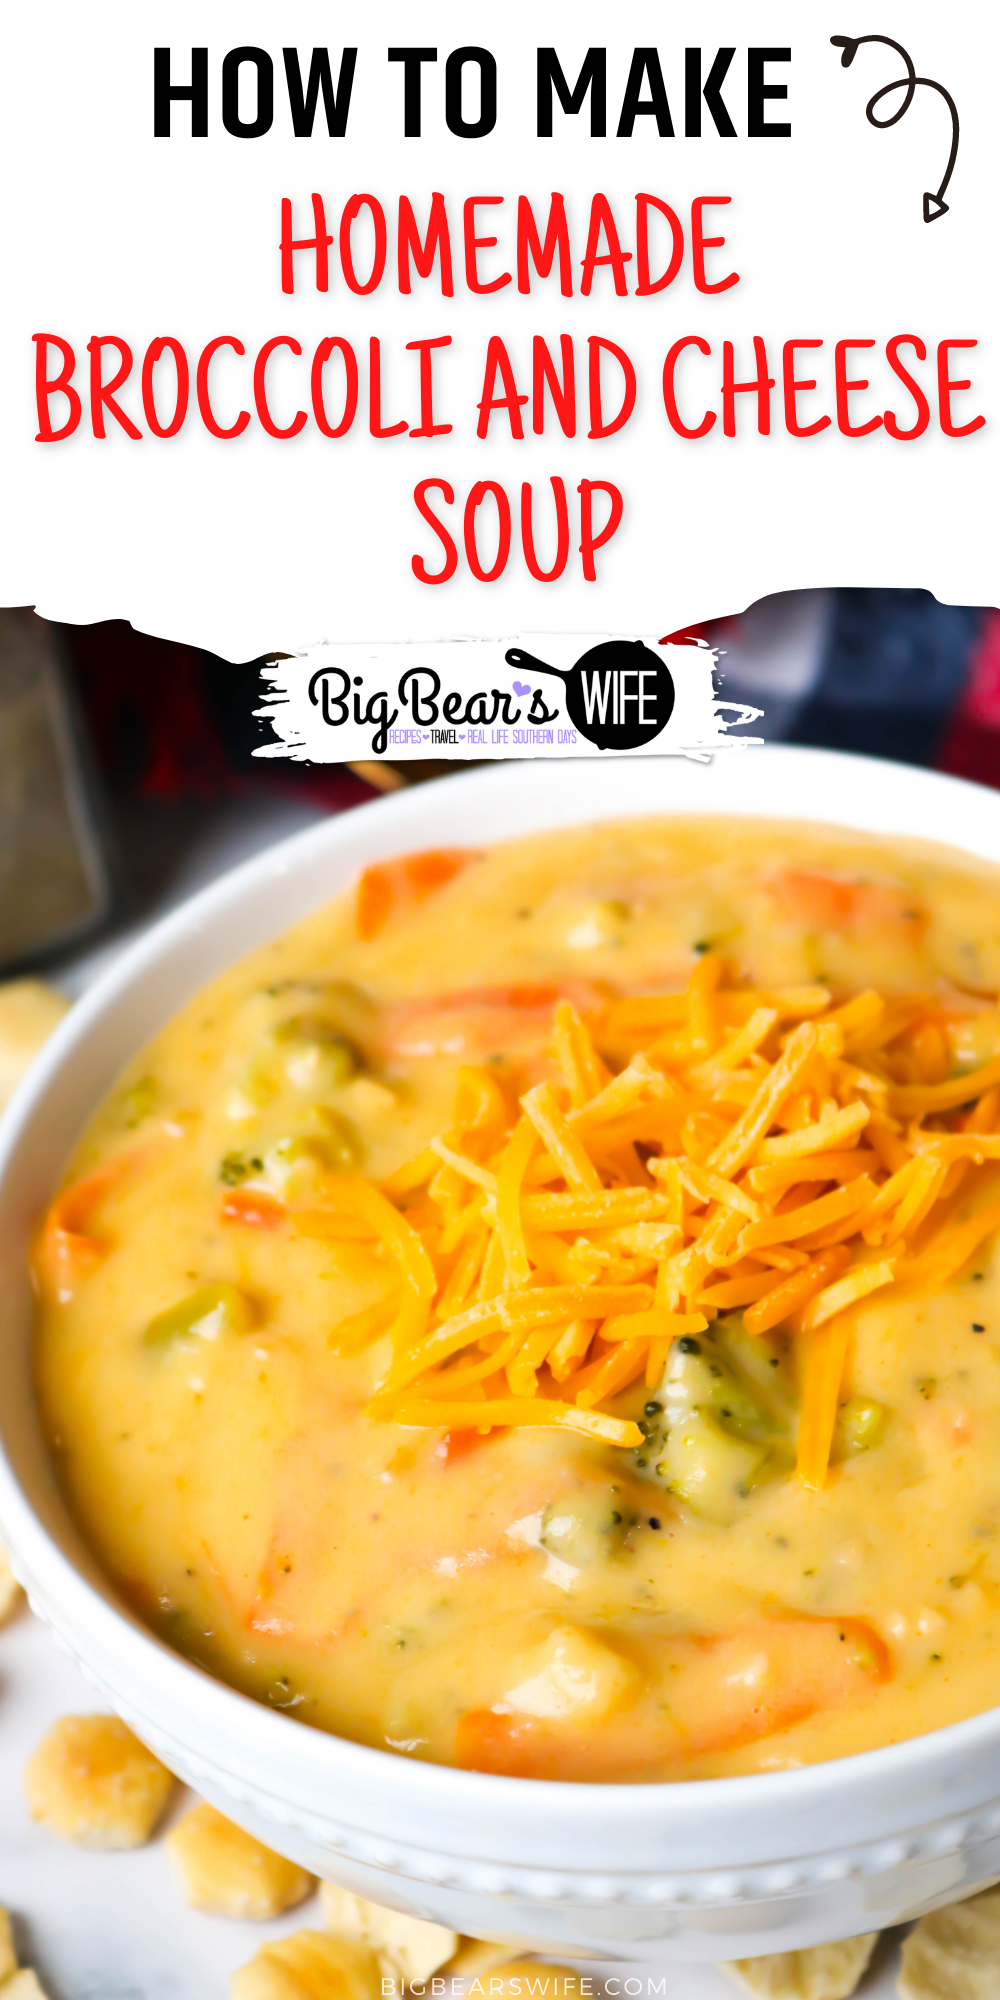 This Homemade Broccoli and Cheese Soup that is packed with broccoli, carrots, garlic and cheese is one of the best broccoli cheese soups I've made at home! It is so easy and so good! via @bigbearswife